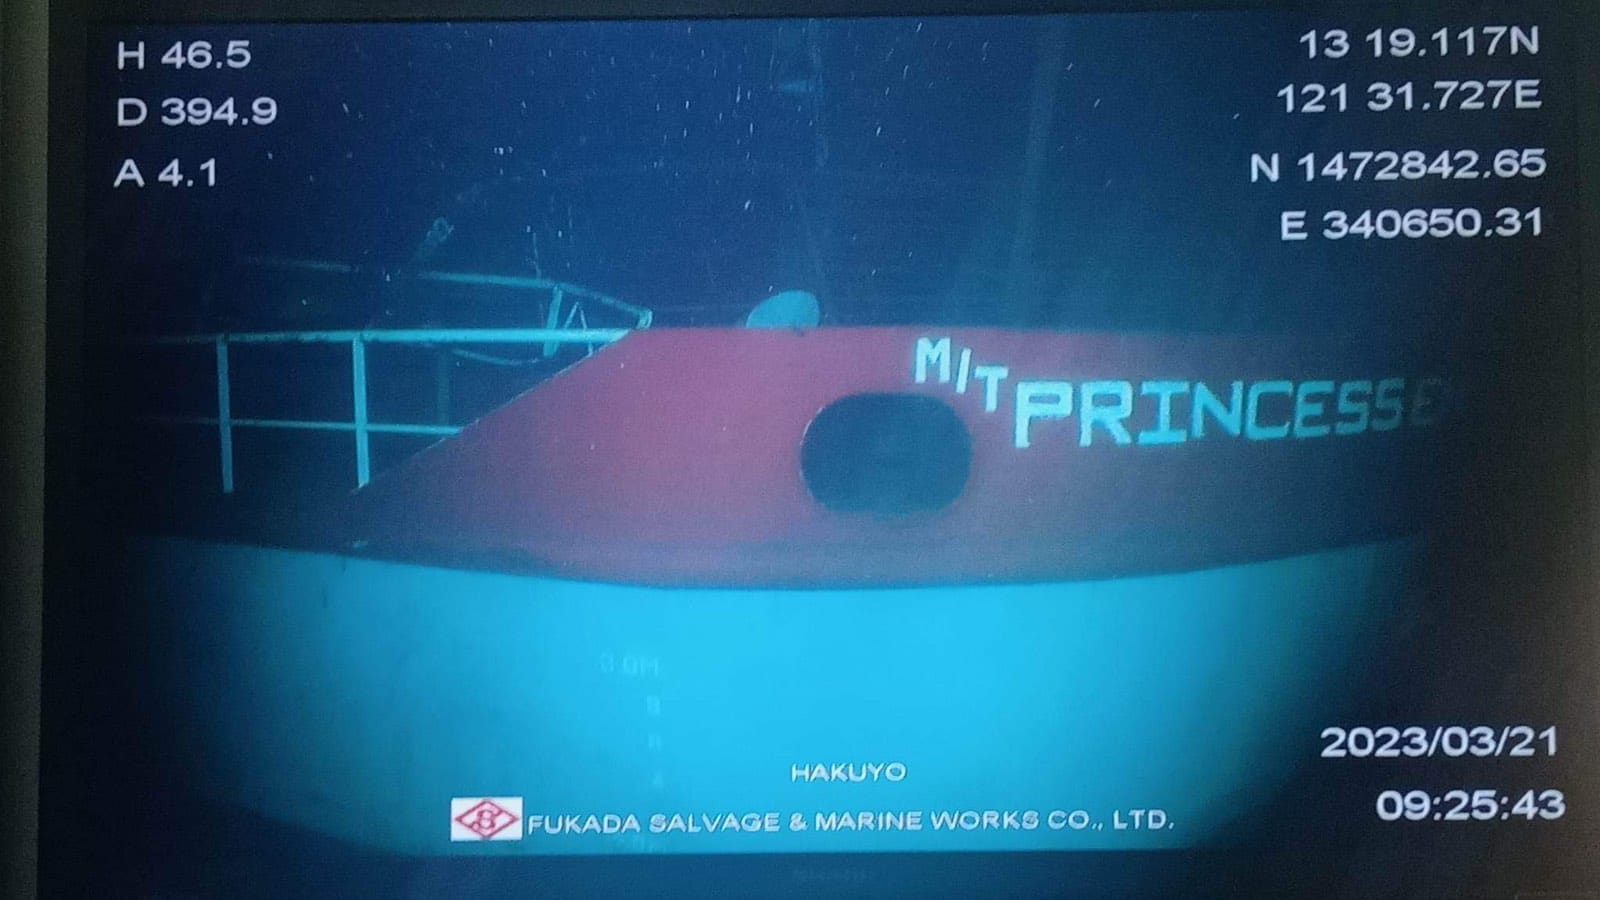 Too early to celebrate: Japanese ROV can’t plug, siphon oil from MT Princess Empress